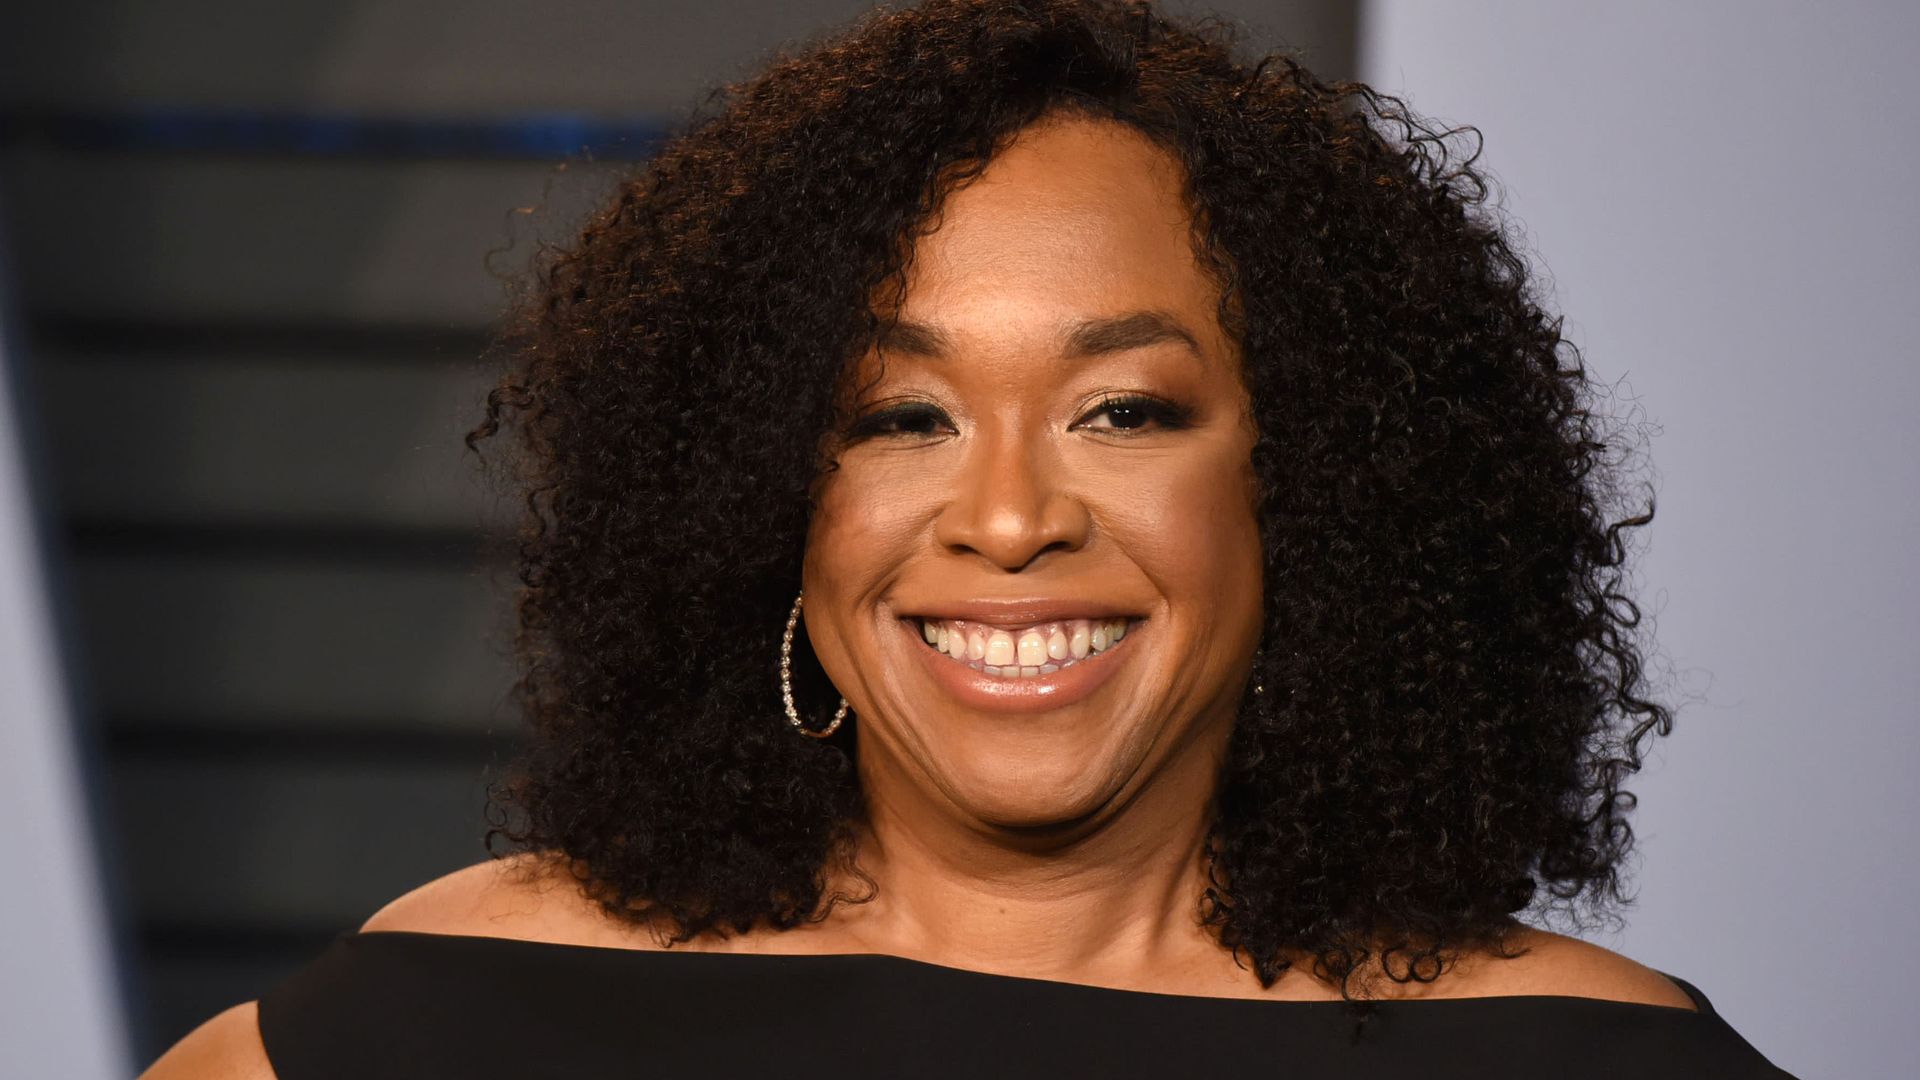 Shonda Rhimes With A Big Smile On Face